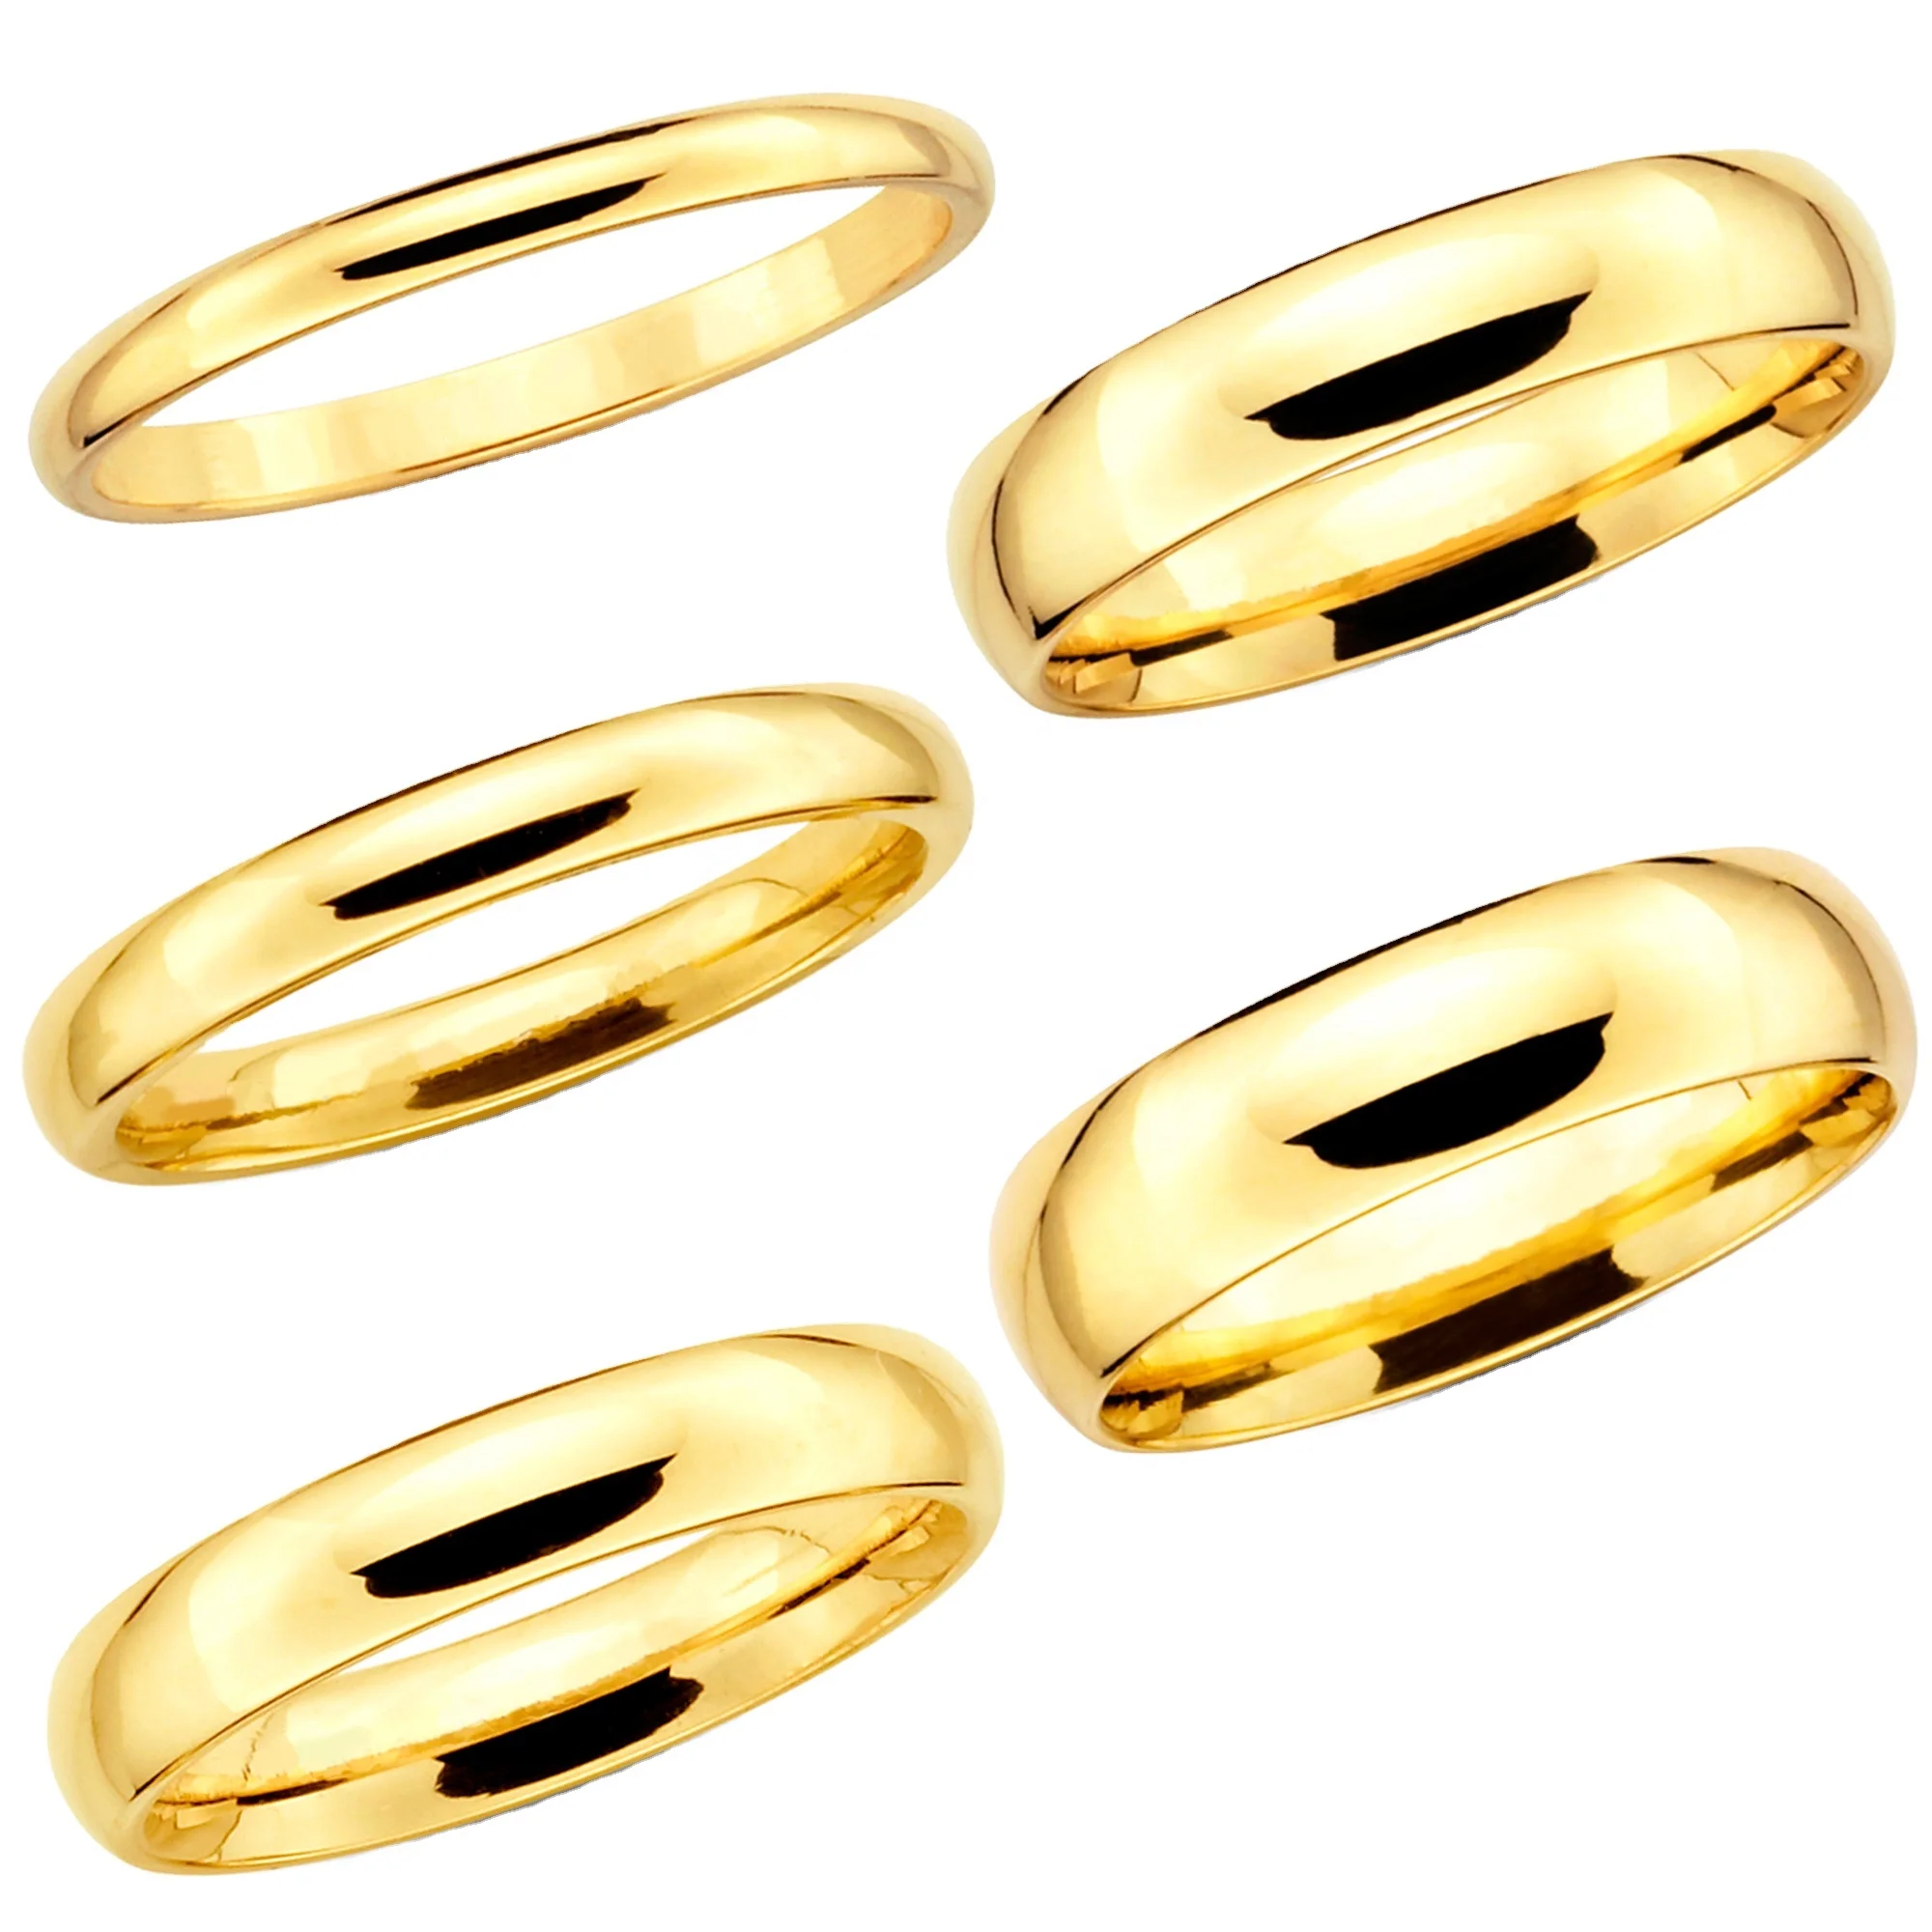 Daily Wear Light Weight Rings from Tanishq💫✨|| Affordable Gold Rings  Starting at Just Rs.10,000/-😱😱 - YouTube